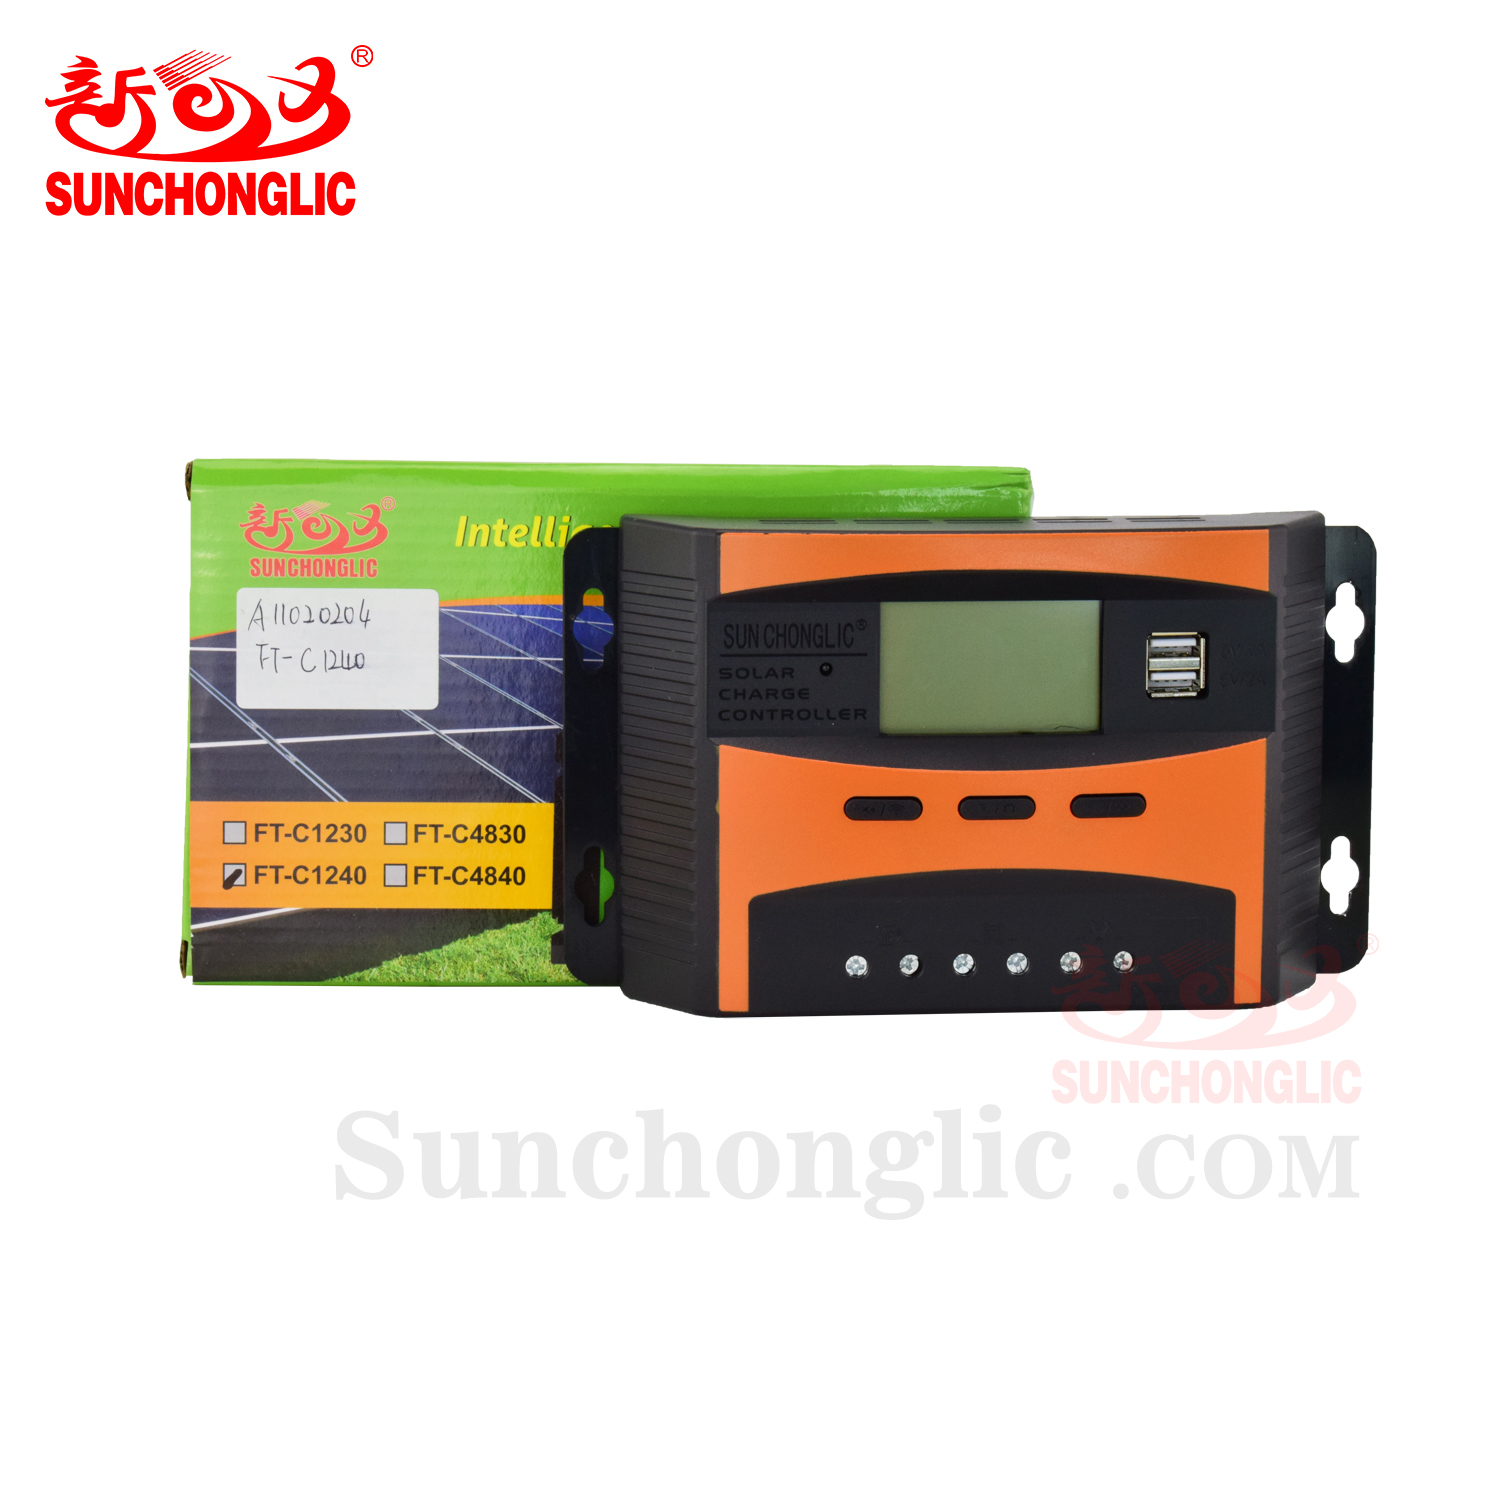 Solar Charge Controller - FT-C1240